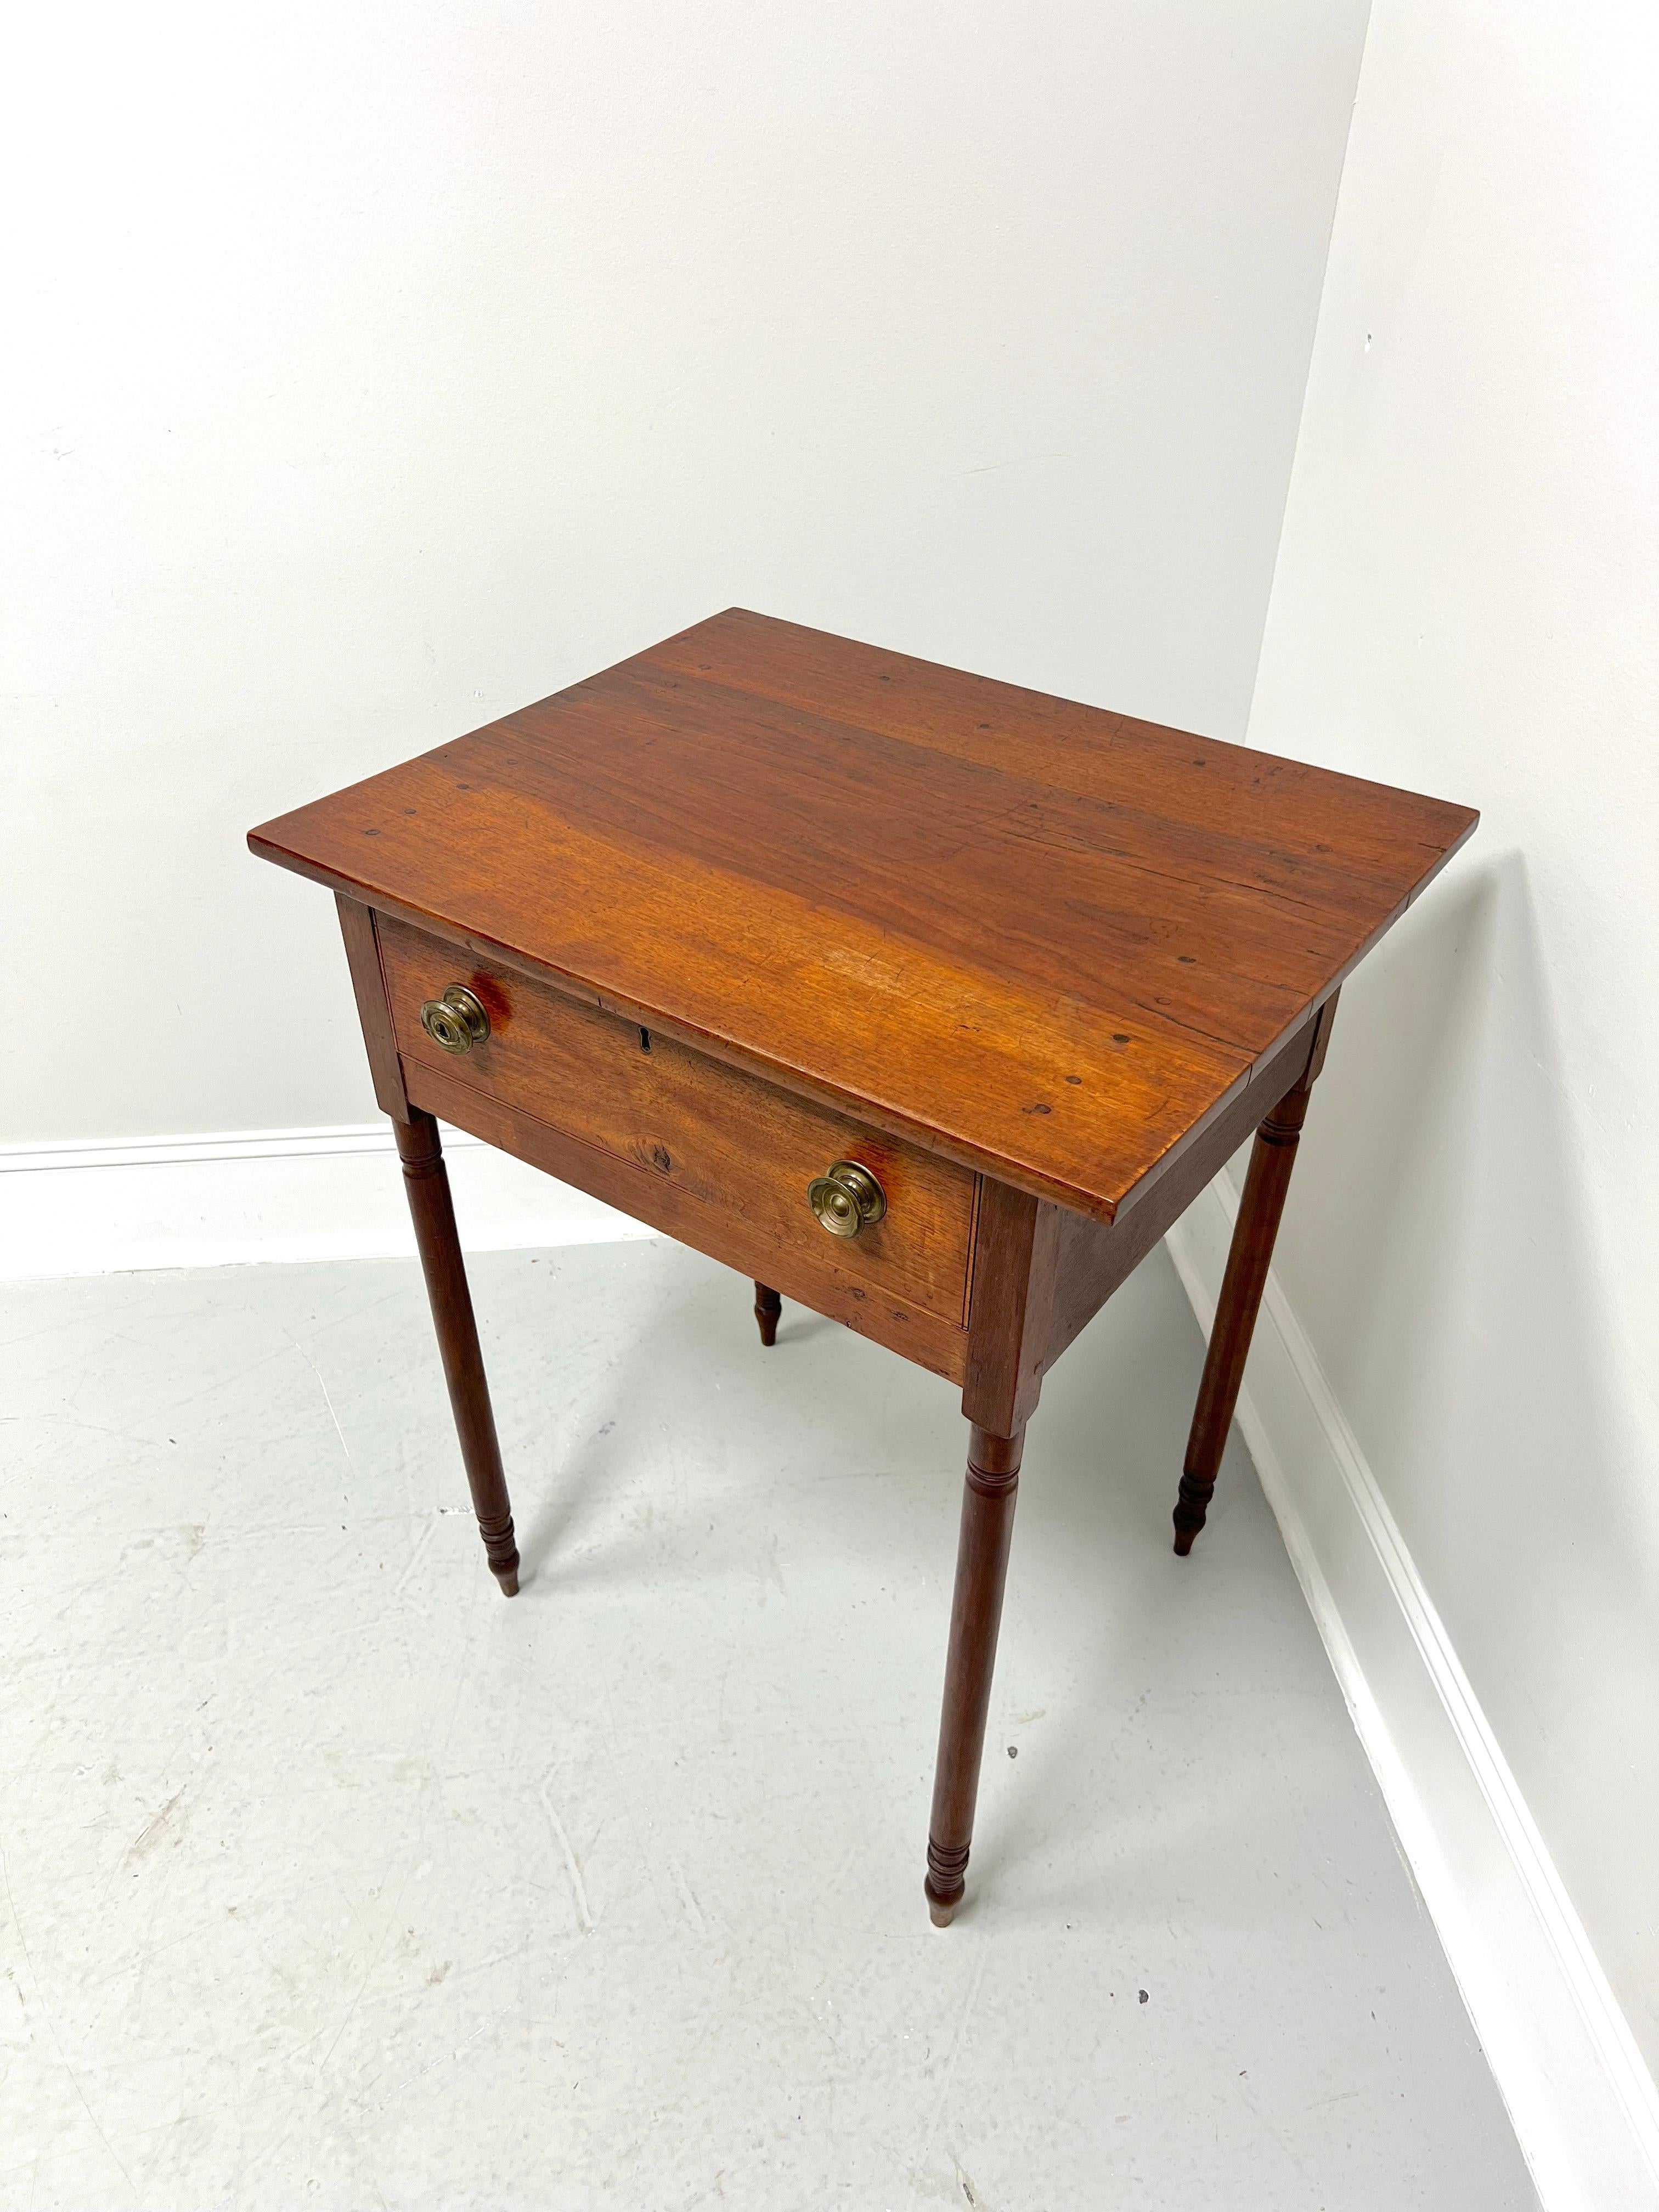 Rustic Antique 19th Century Walnut Single Drawer Accent Table on Turned Legs For Sale